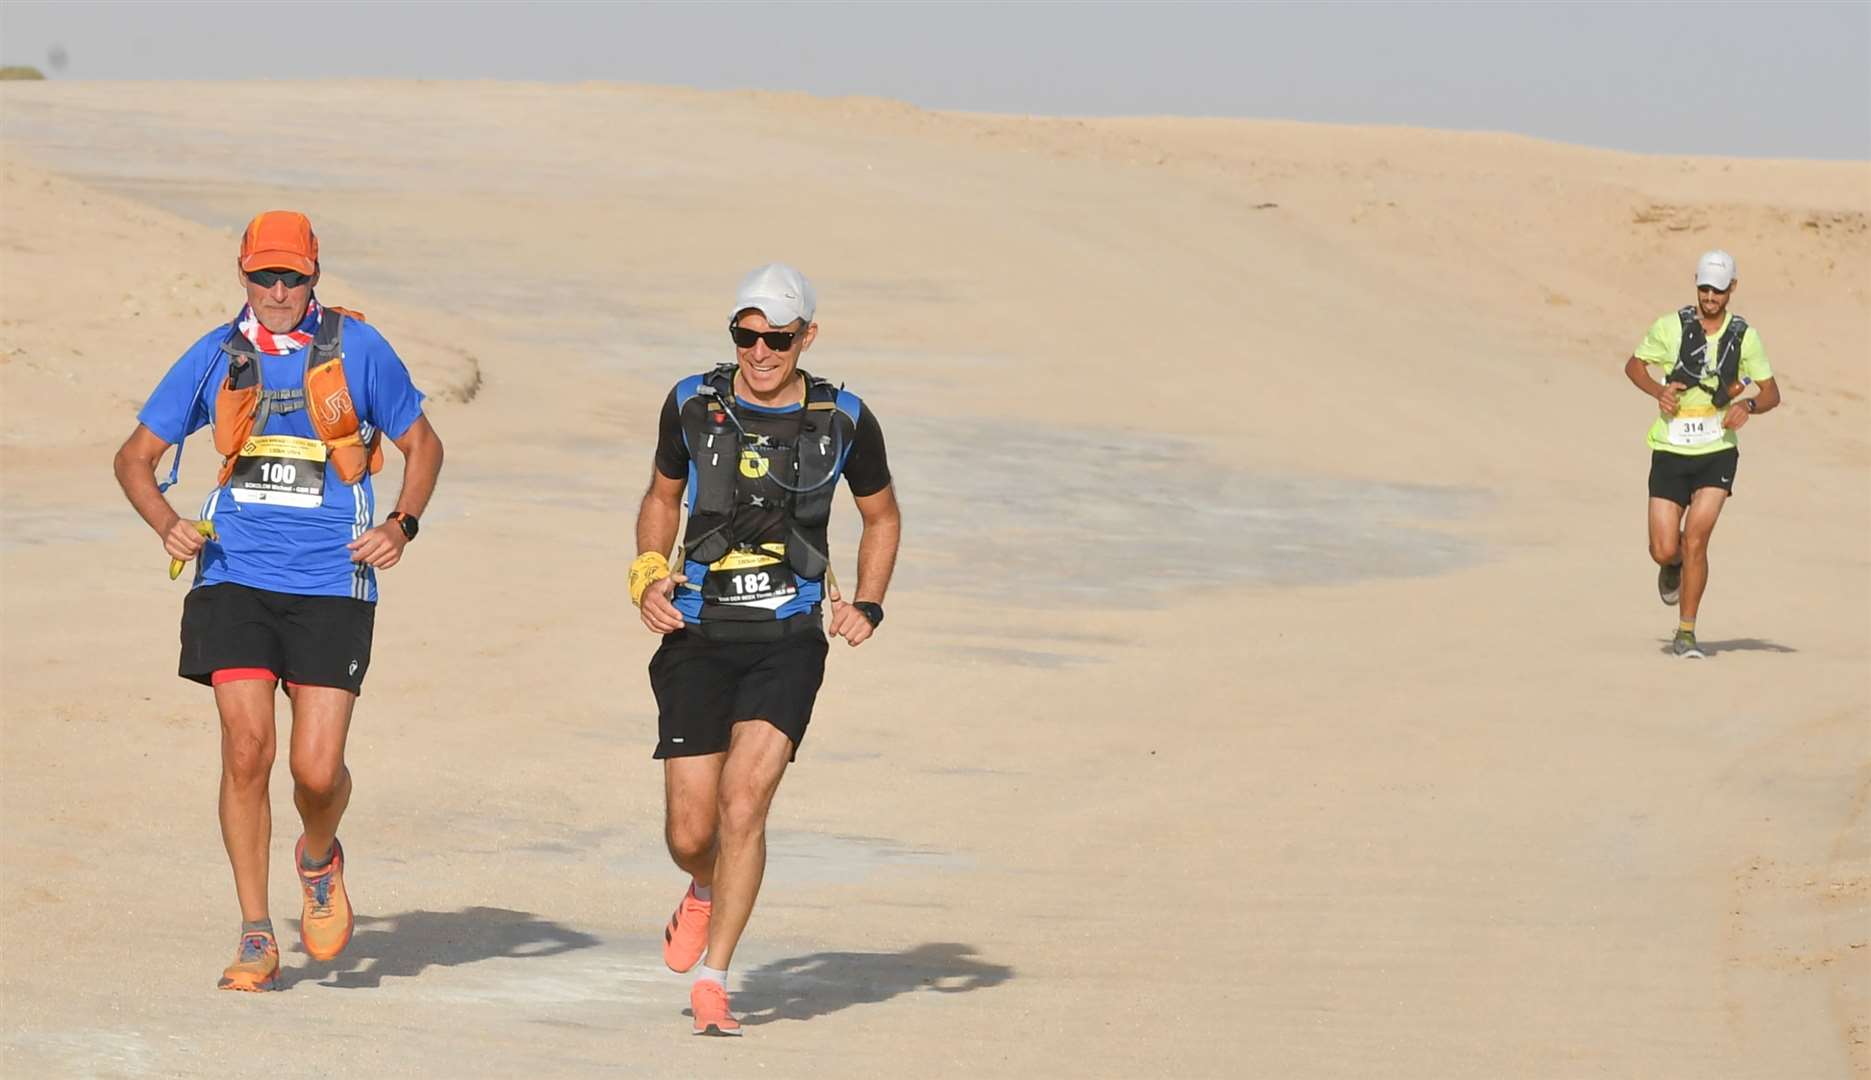 Michael Sokolow (left) takes on 100k in the Sahara heat. Picture: Jules Annan